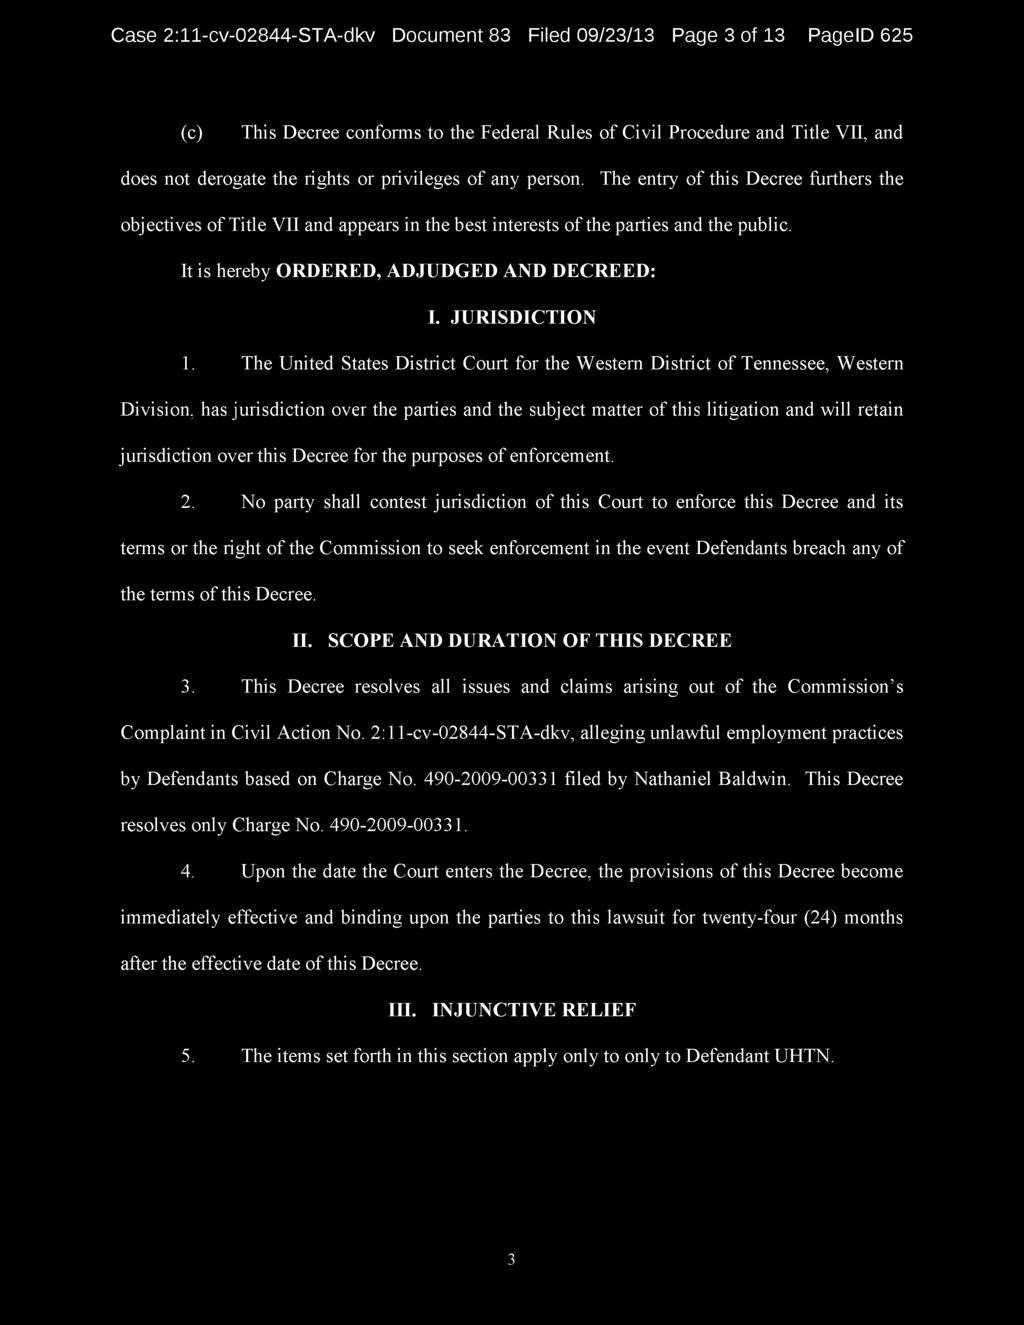 Case 2:11-cv-02844-STA-dkv Document 83 Filed 09/23/13 Page 3 of 13 PagelD 625 (c) This Decree conforms to the Federal Rules of Civil Procedure and Title VII, and does not derogate the rights or